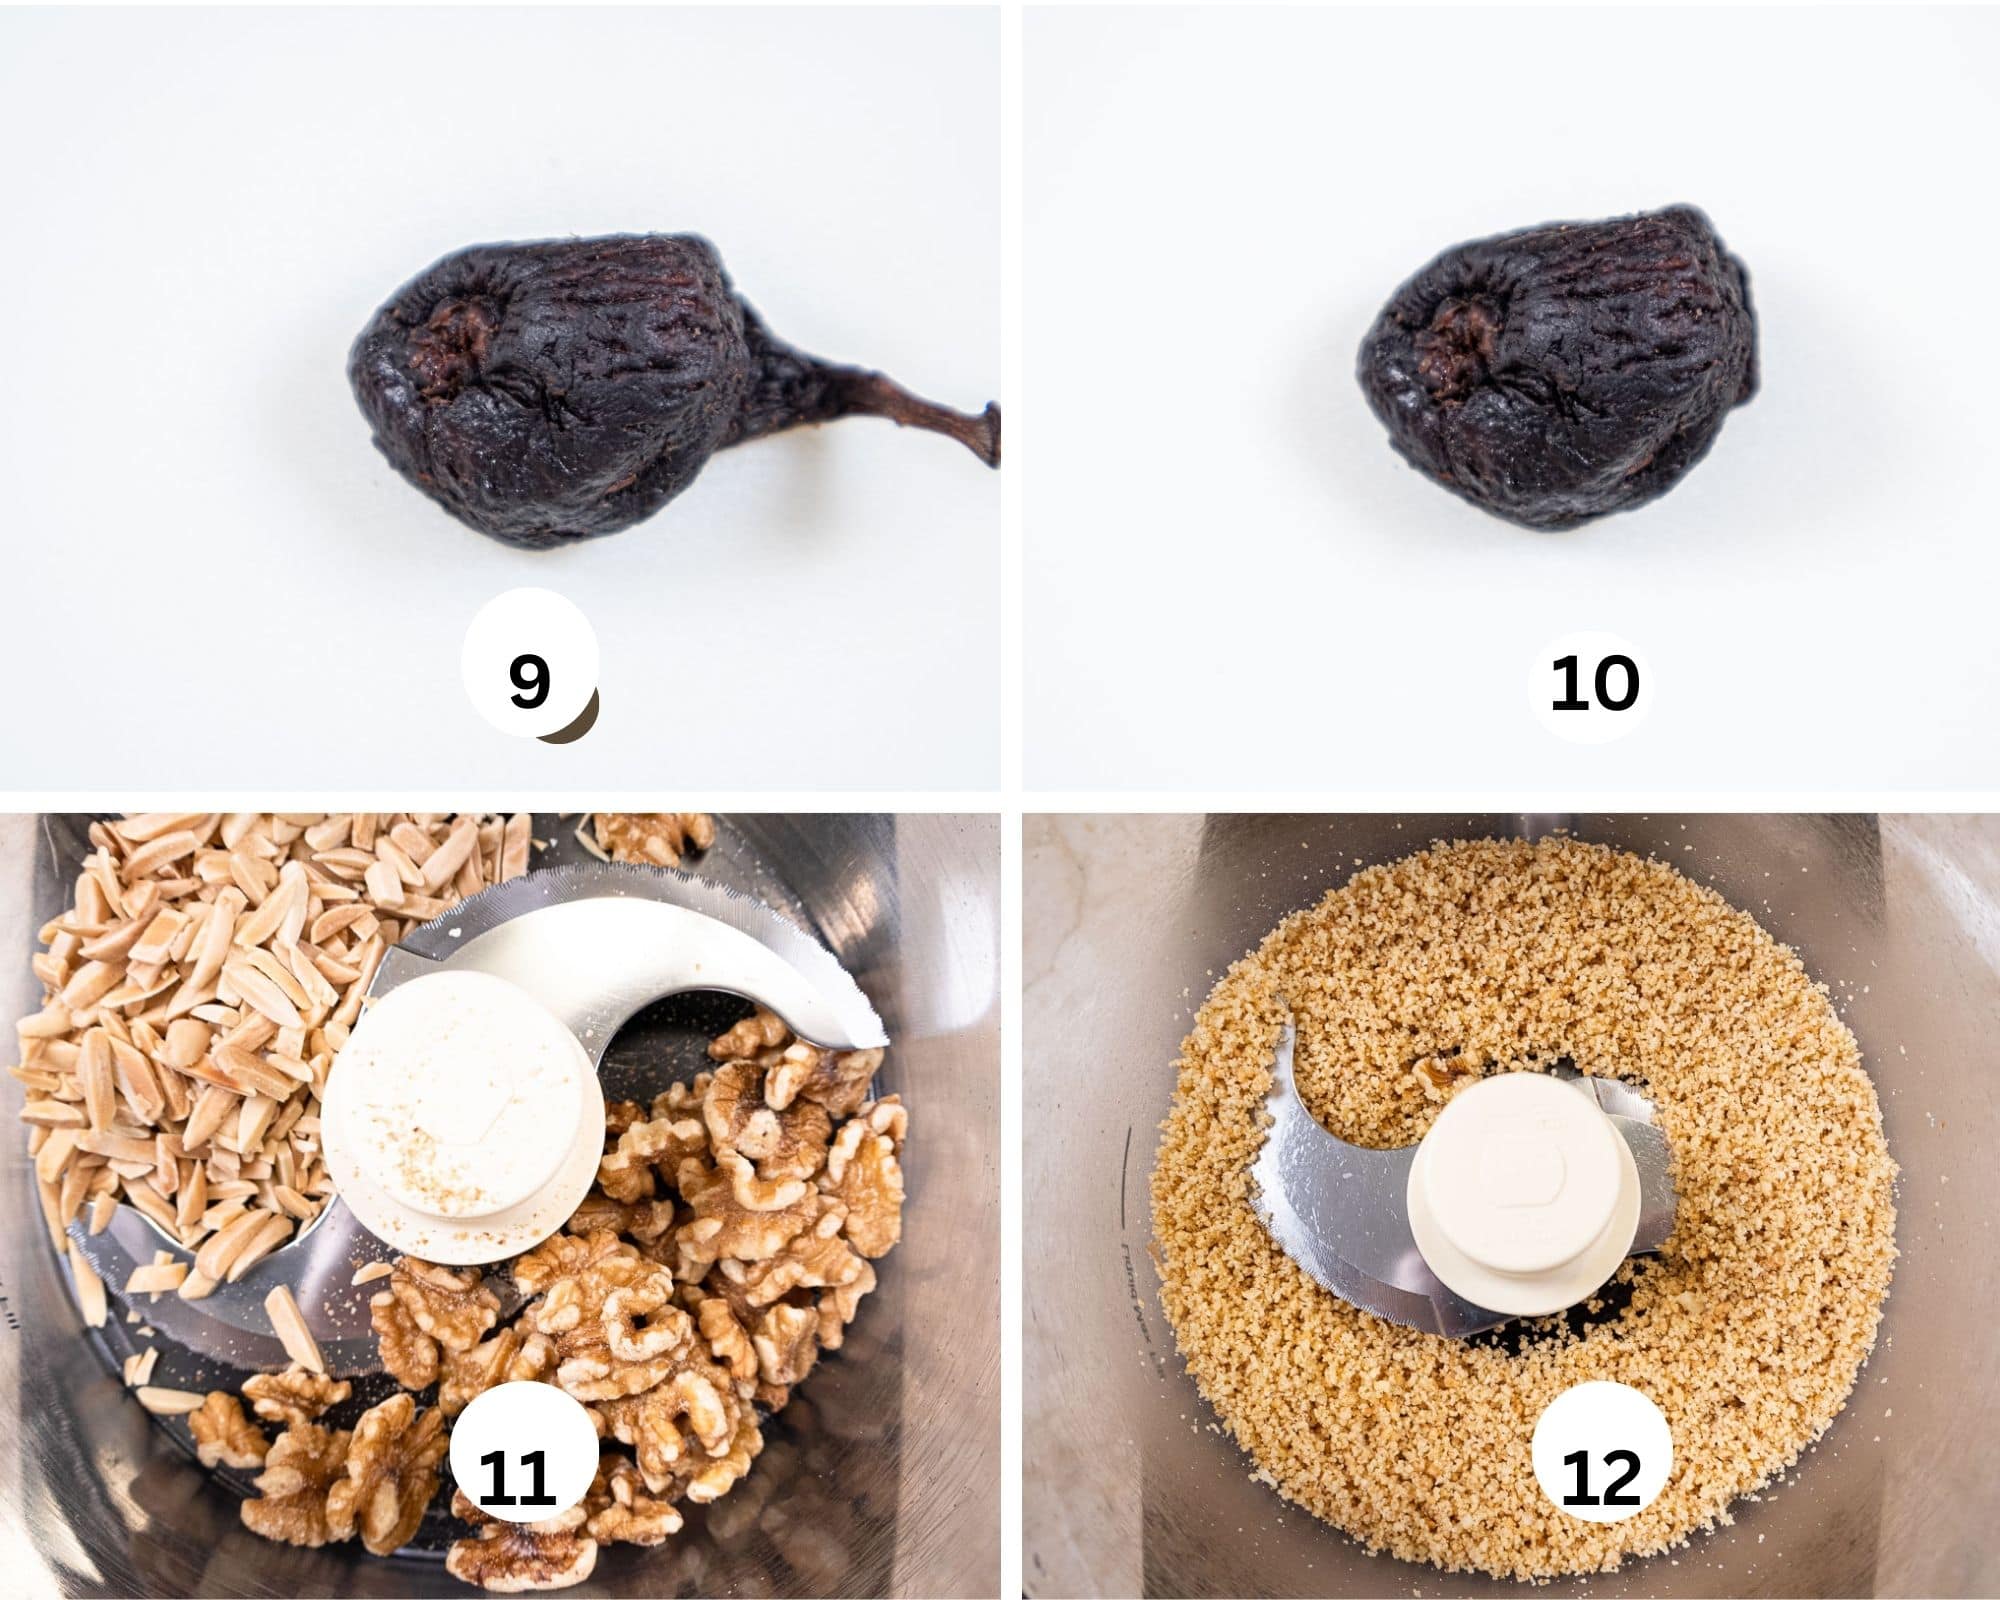 The next collage shows a fig with the stem, and the stem cut off, the almonds and walnuts in the processor, and then processed to finely cut.  